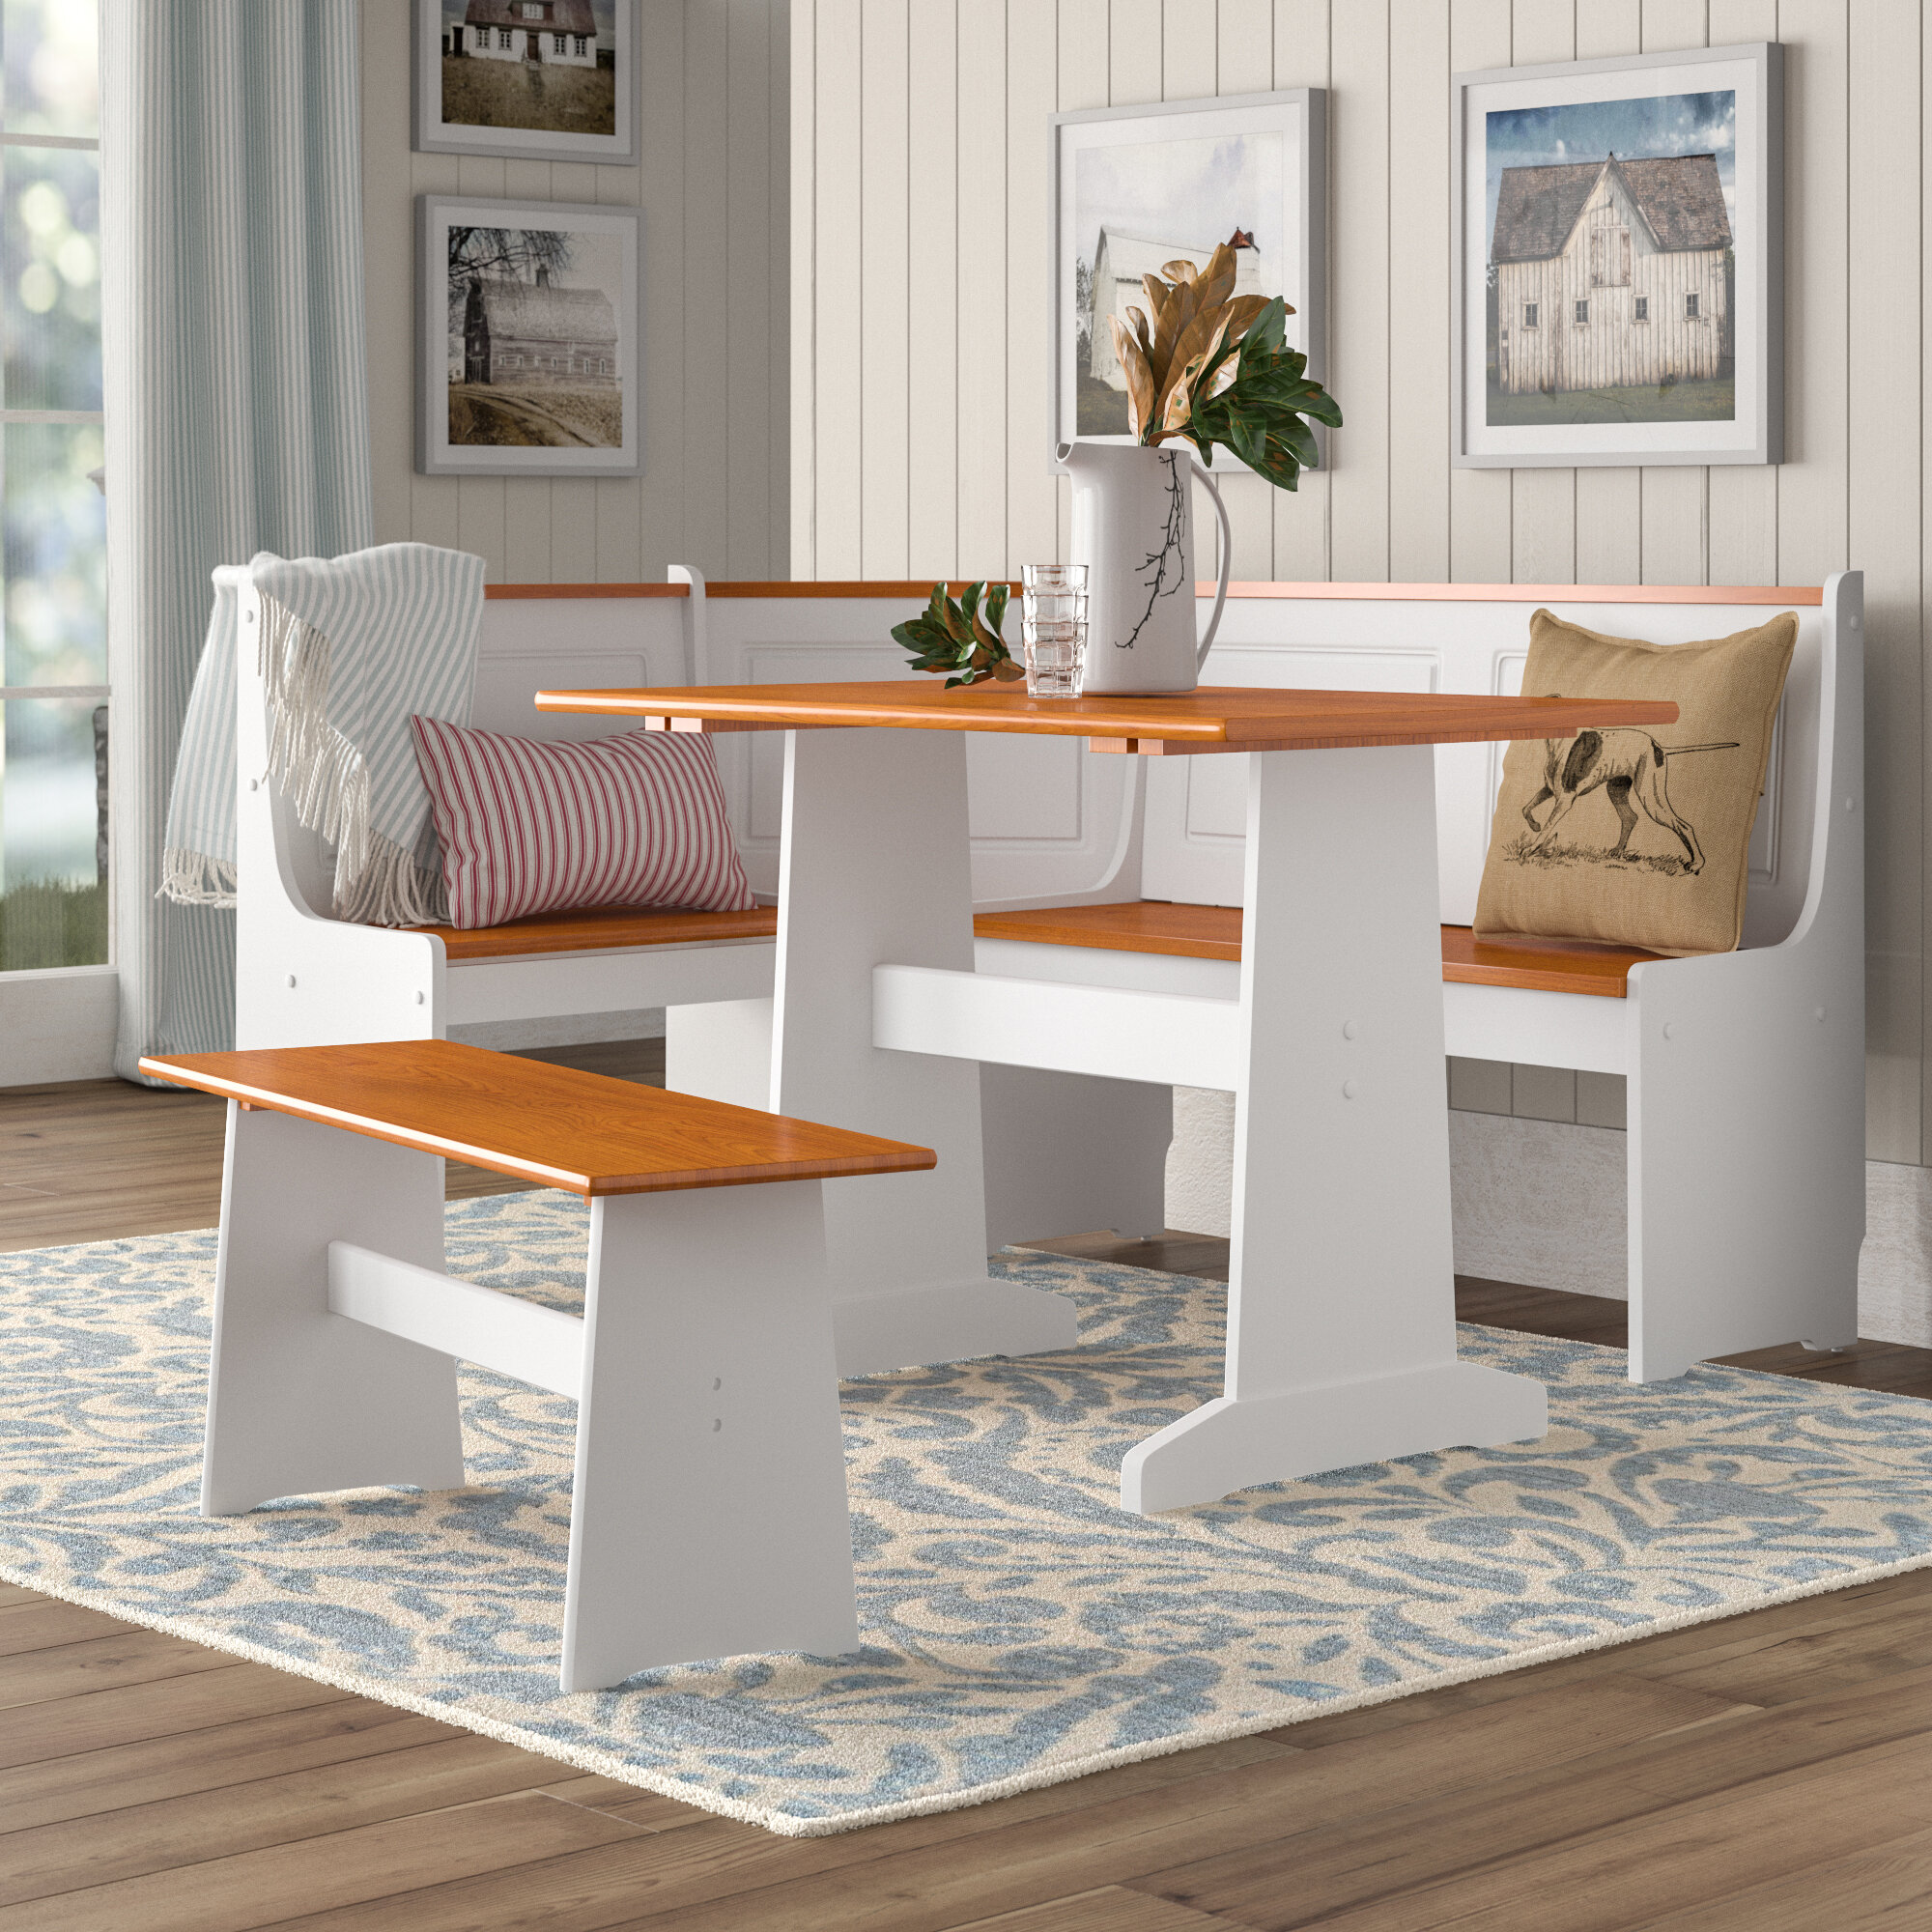 Wayfair | 3 Piece Kitchen  Dining Room Sets You'll Love in 2022